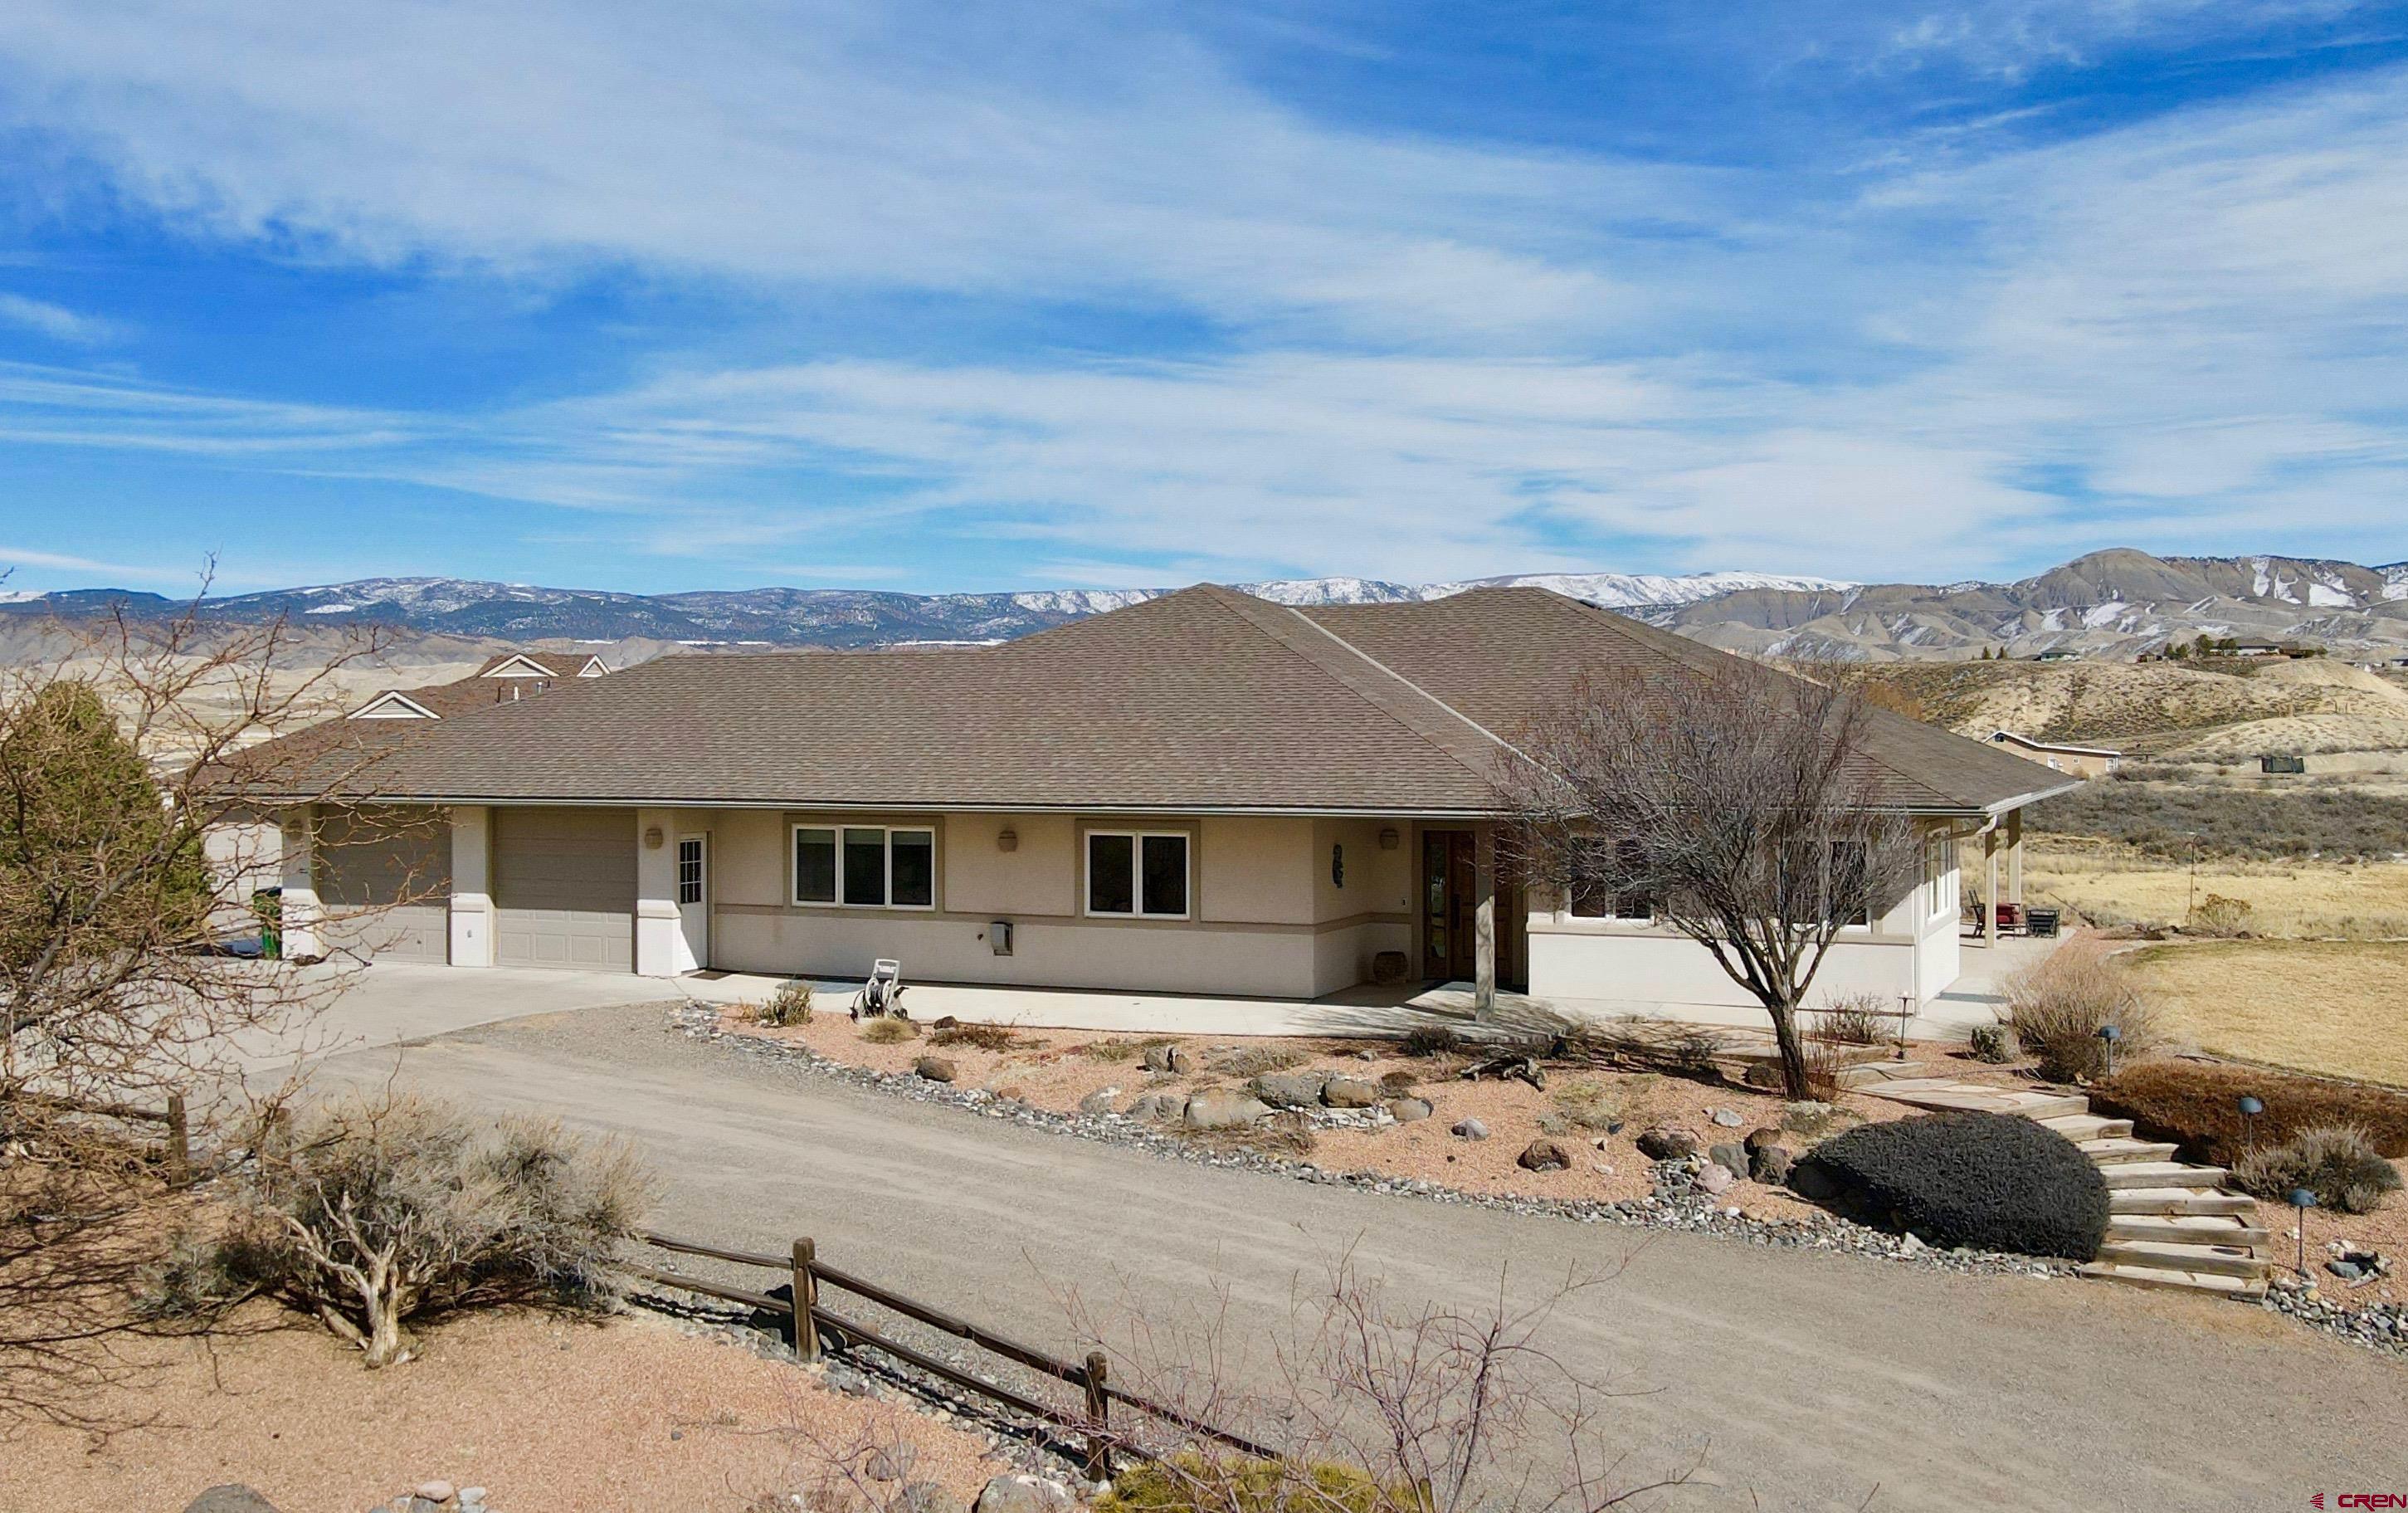 Phenomenal, unobstructed views of the San Jaun Mountains and more. This 4000+ square foot home has it all. An upgraded and open kitchen allows for ample room for any cooking, baking, or canning project you might have in mind. This home also features two living rooms, a kitchen, and a 2-car garage. Go down just a couple of steps, and enter the second living room area, complete with a gas fireplace. In this space there is even more room for guests to stay as well as entertainment. Enjoy your own theater or have a cocktail at the bar/kitchen area! This downstairs space has so much room for you to make this house your own, and you could even add a pool and air hockey table! If that’s not what you had in mind the space would also make an optimal gym anyone would love. Did I mention the views? Situated perfectly, this home is optimal for those who must have the perfect views. From the backyard look out on the protected green space. This ensures no one will ever be able to build in front of you and take away the majestic scenery away! Don’t wait, as this home is one that you won’t want to miss!